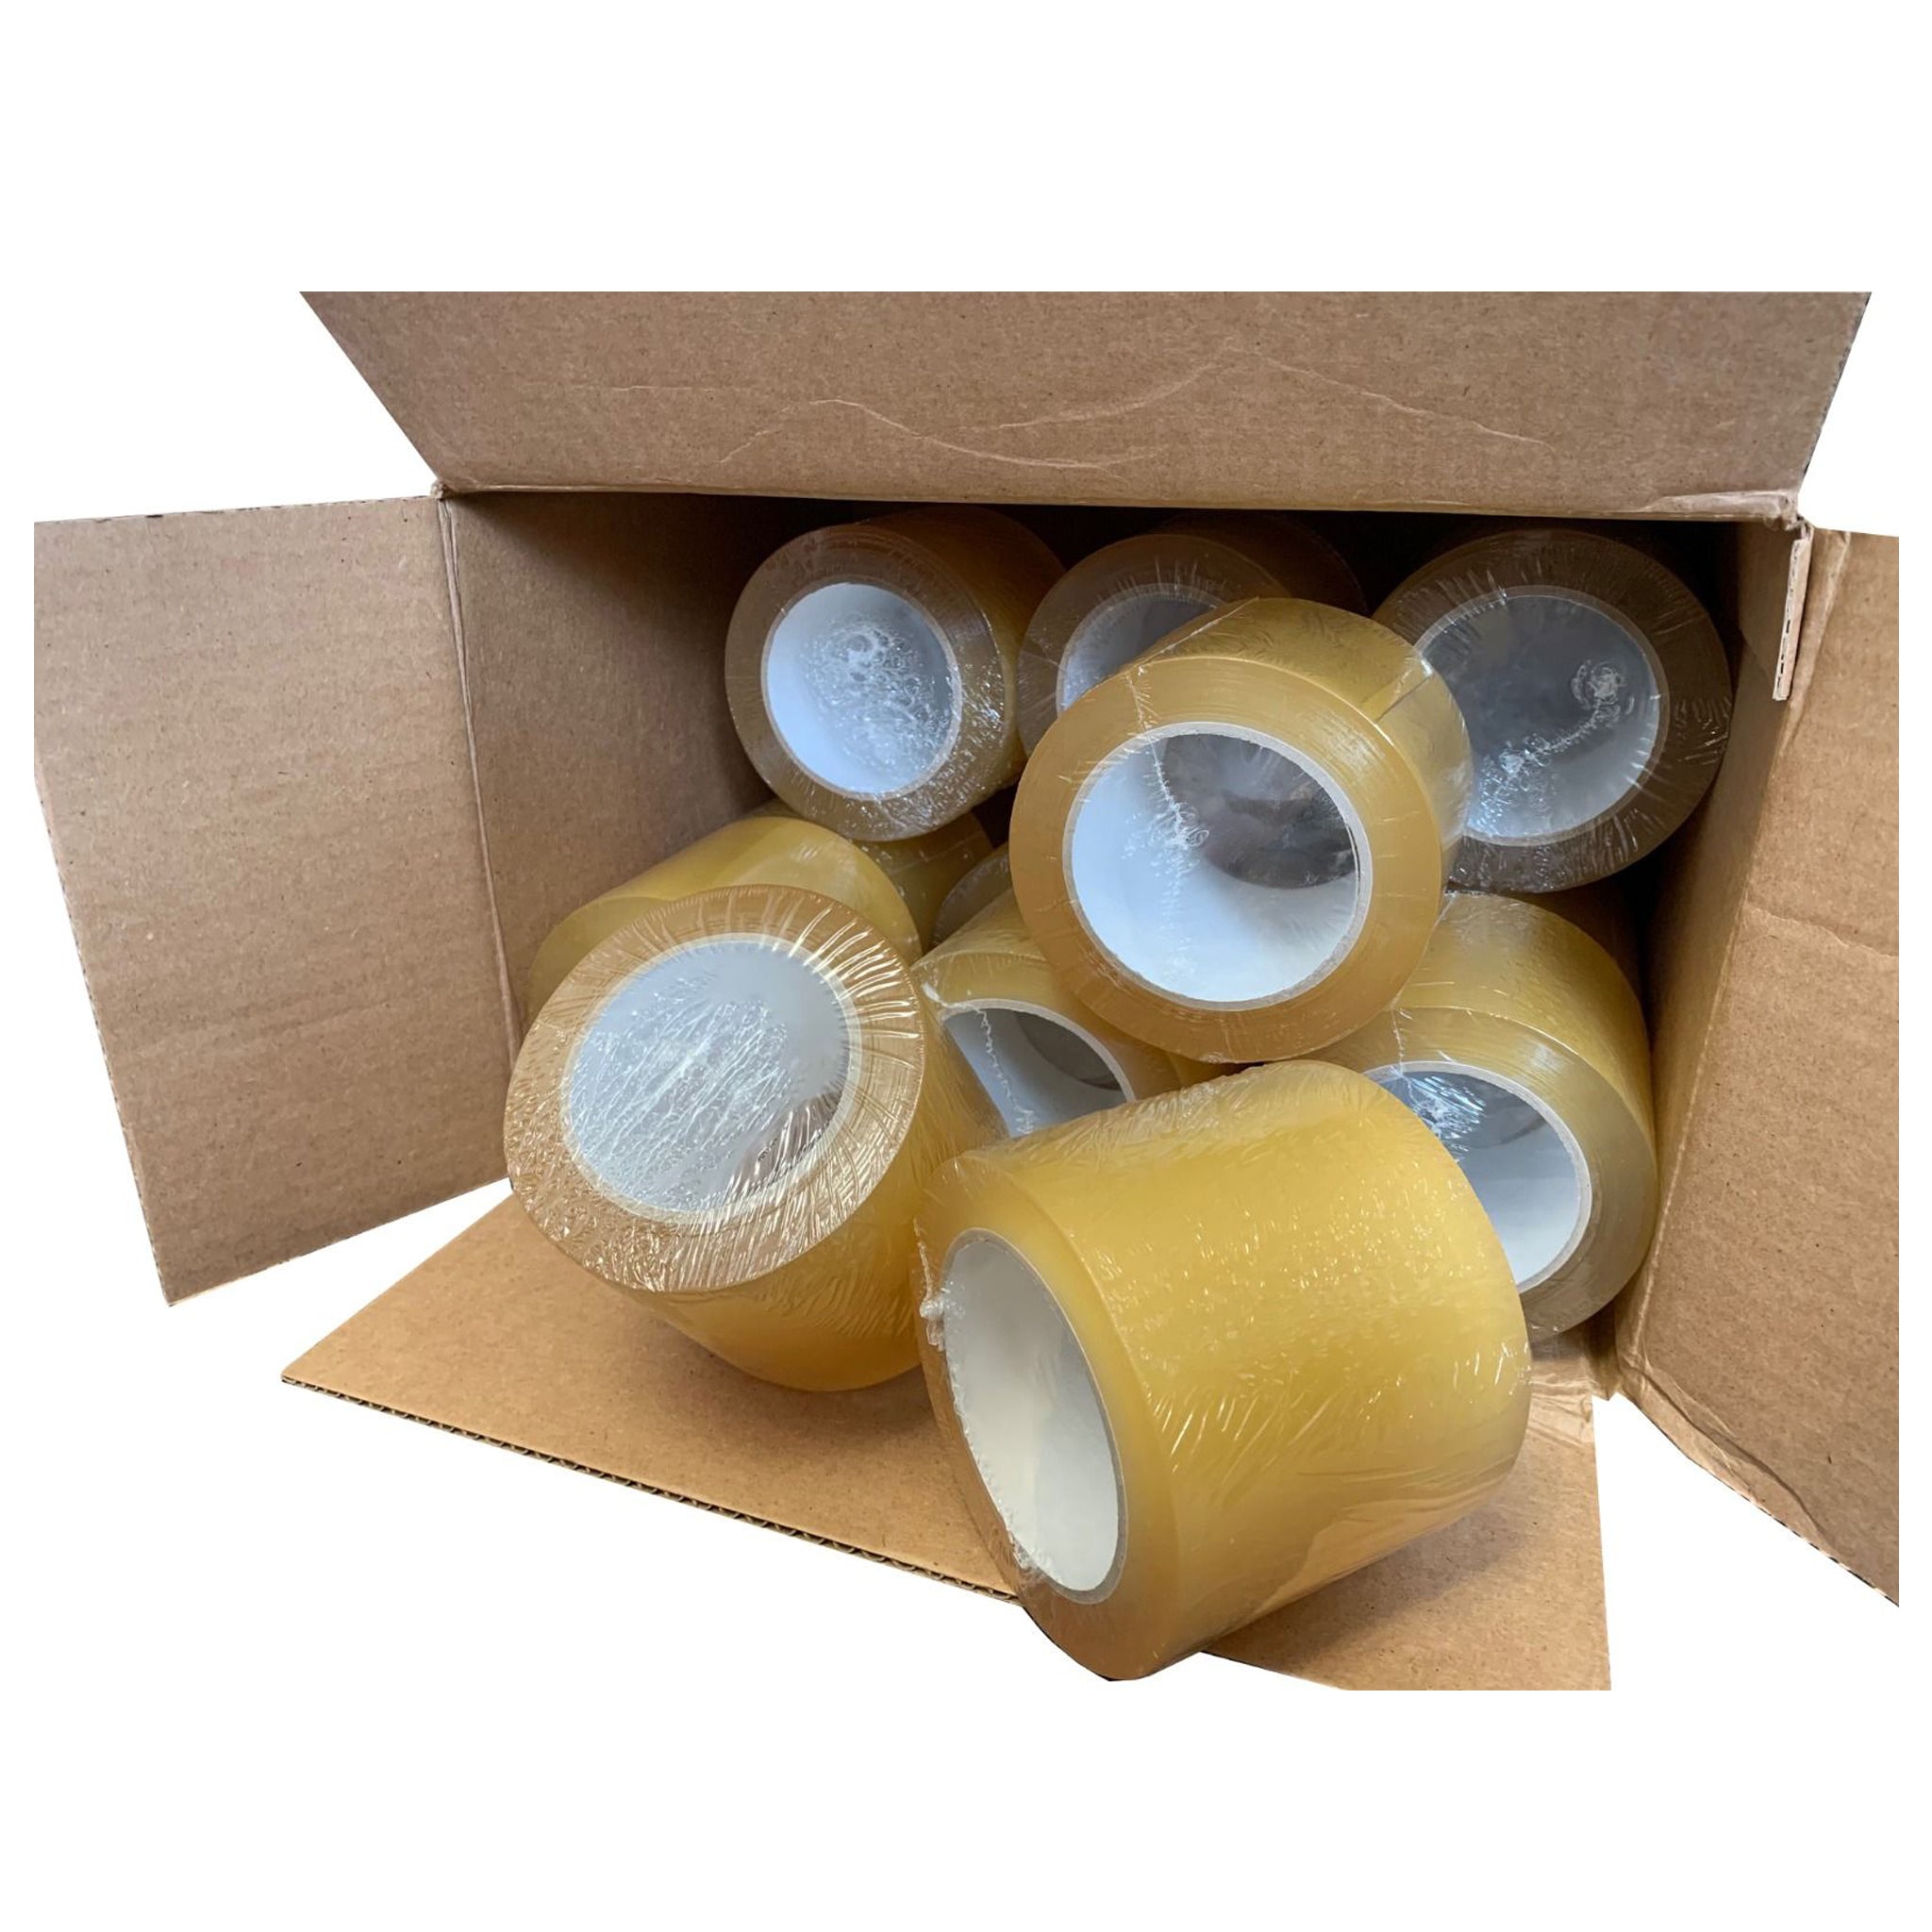 Wrestling Mat Tape – Strength and Reliability in Every Roll!"